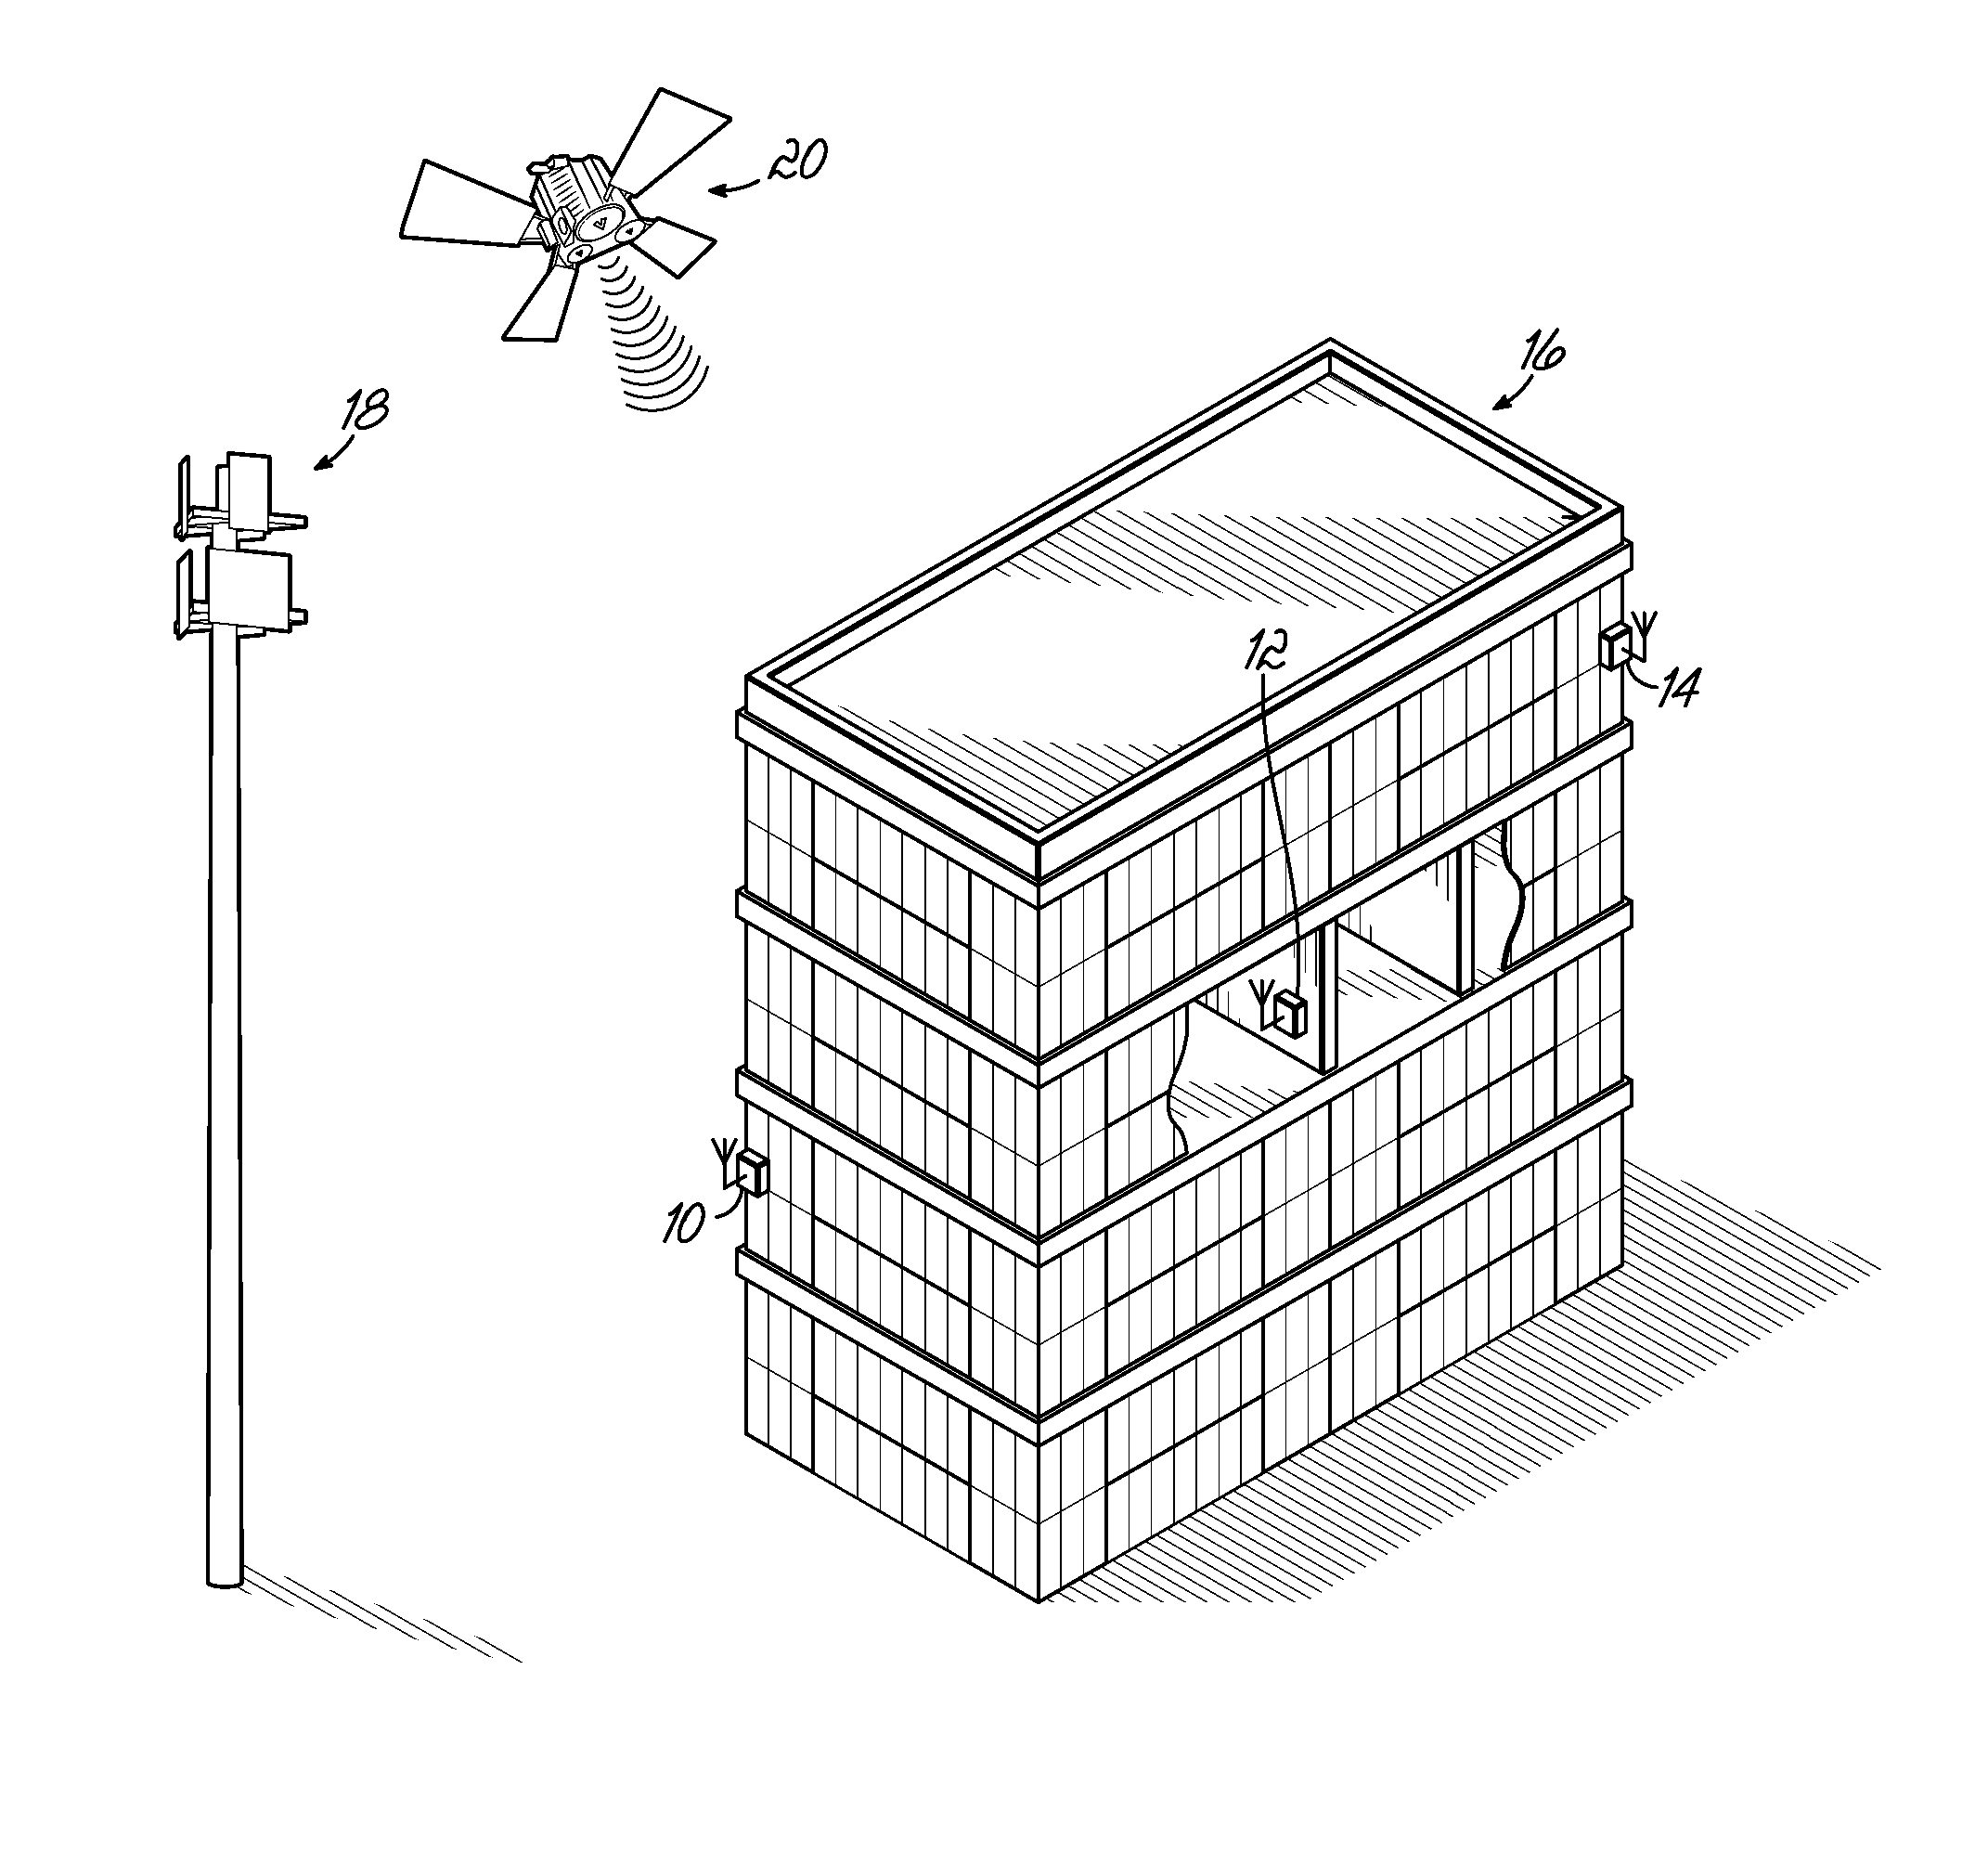 System and method for location of mobile devices in confined environments